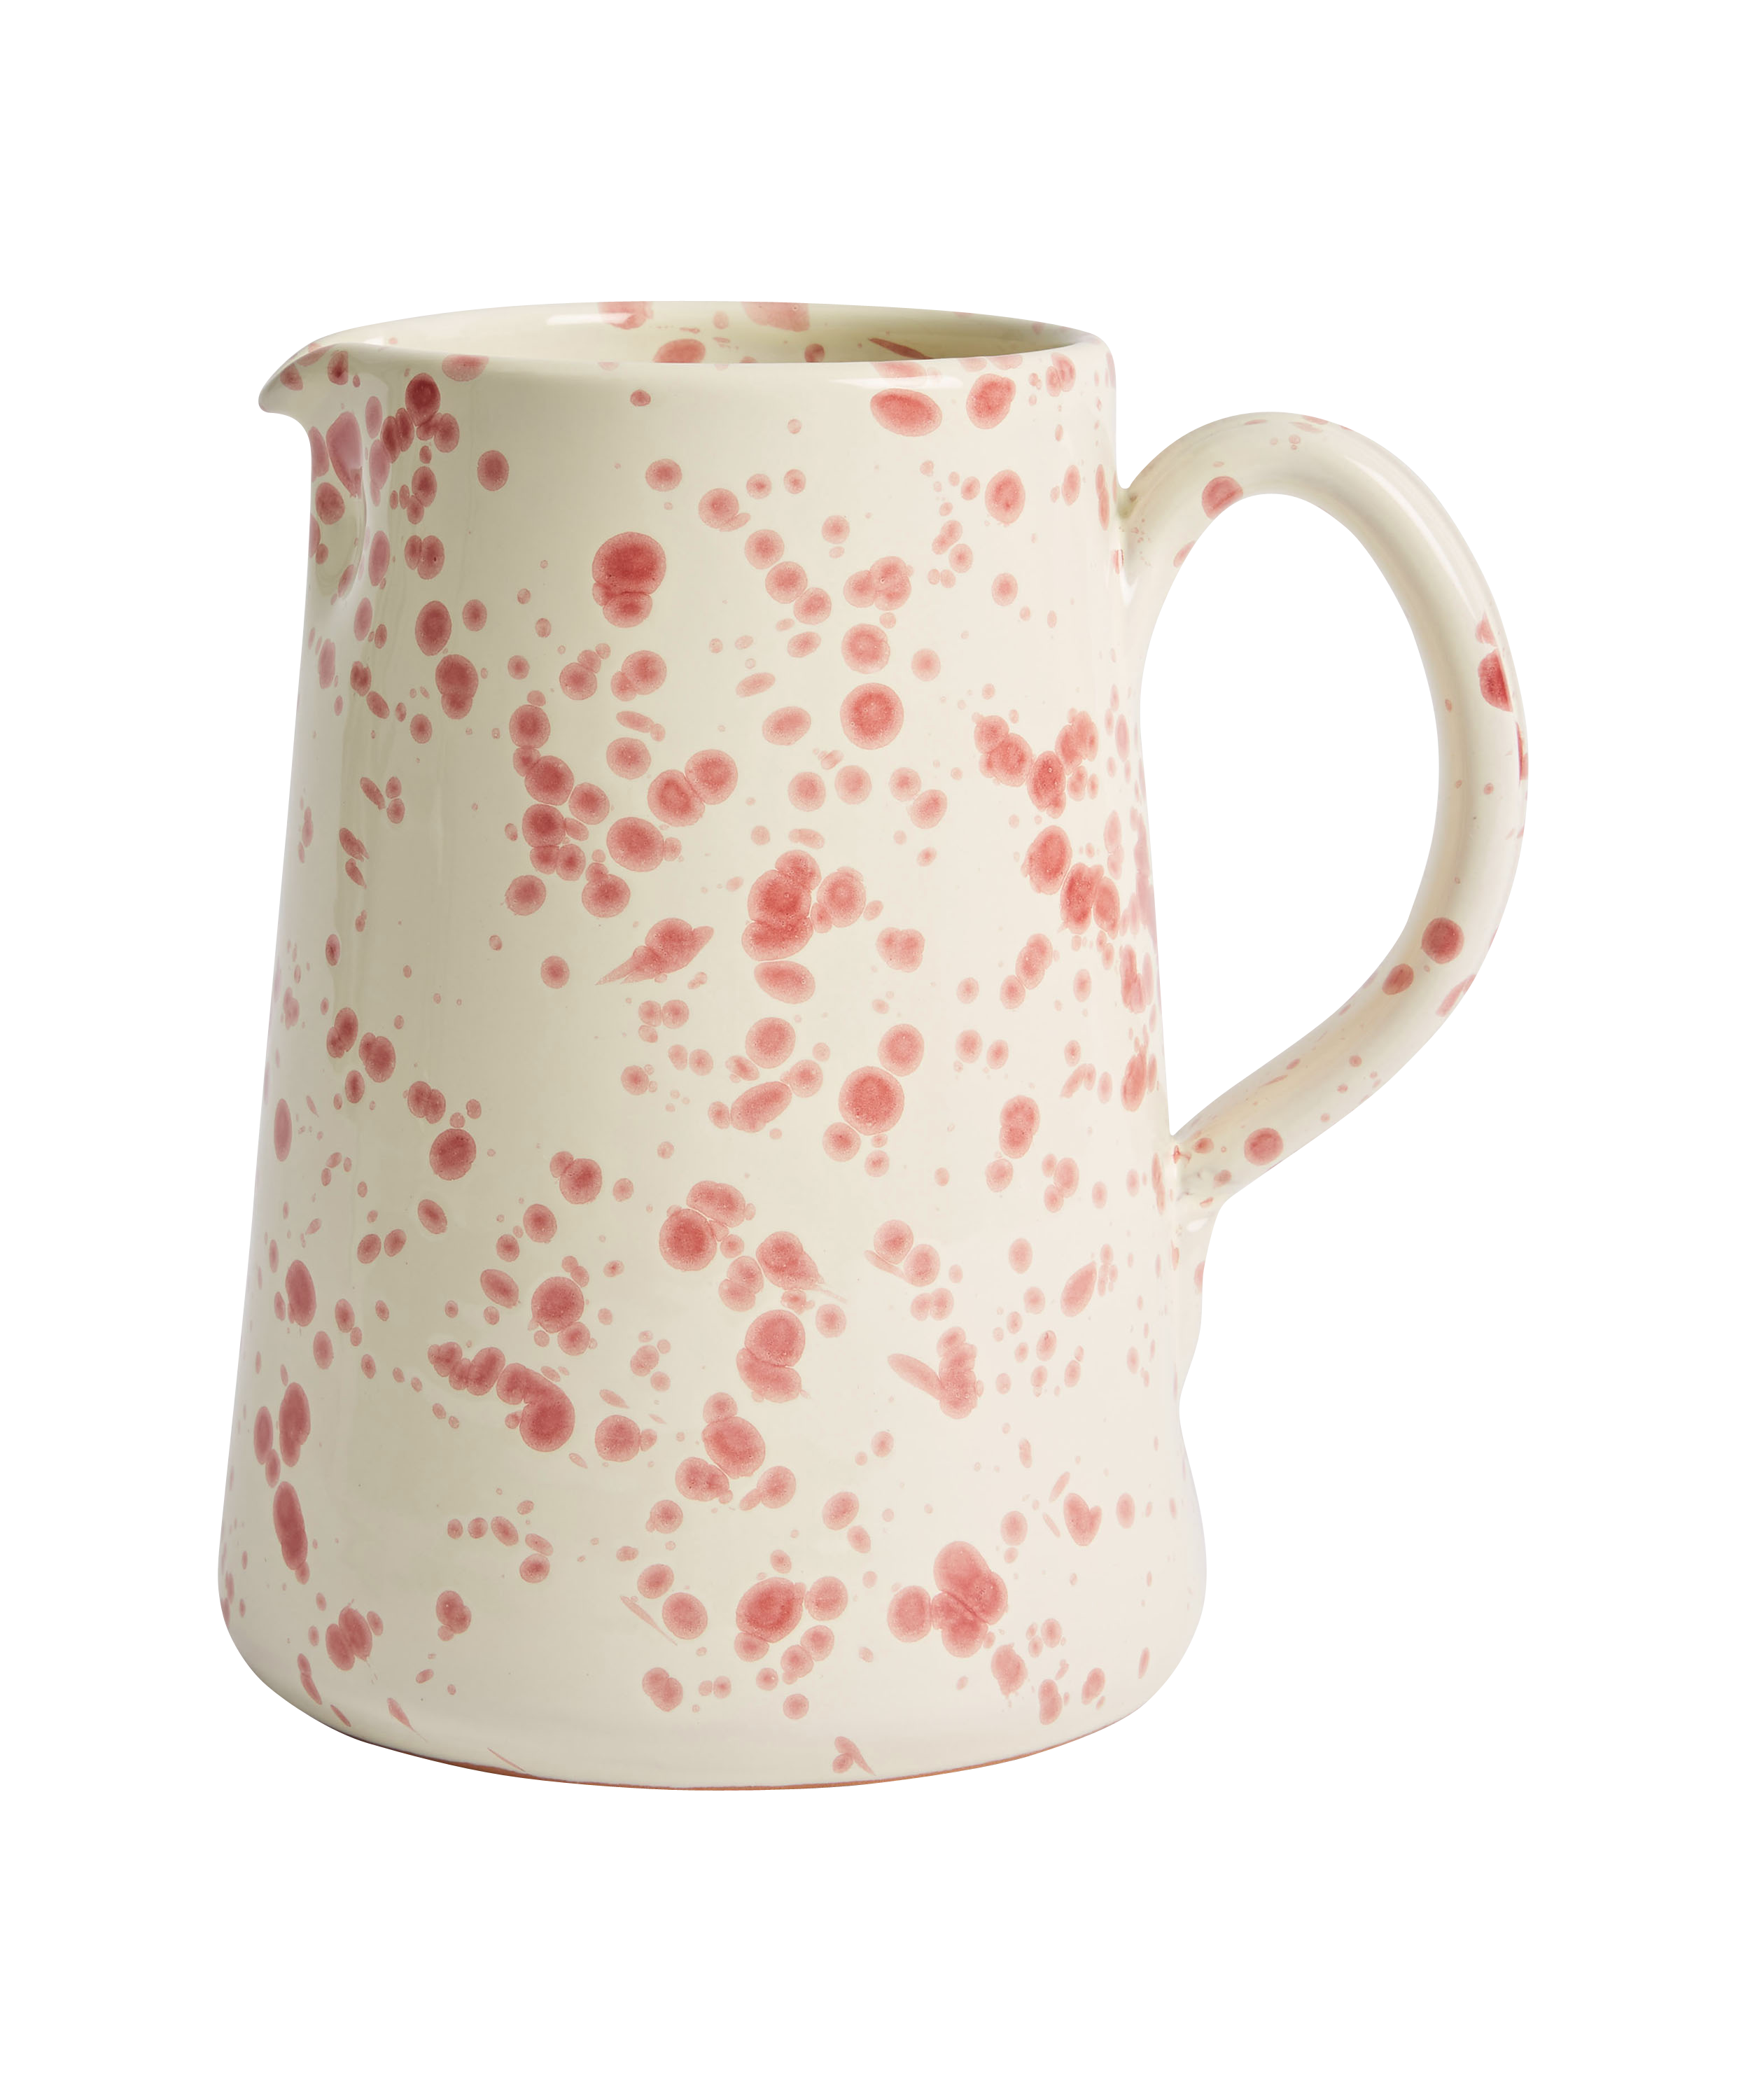 Hot Pottery jug in cranberry